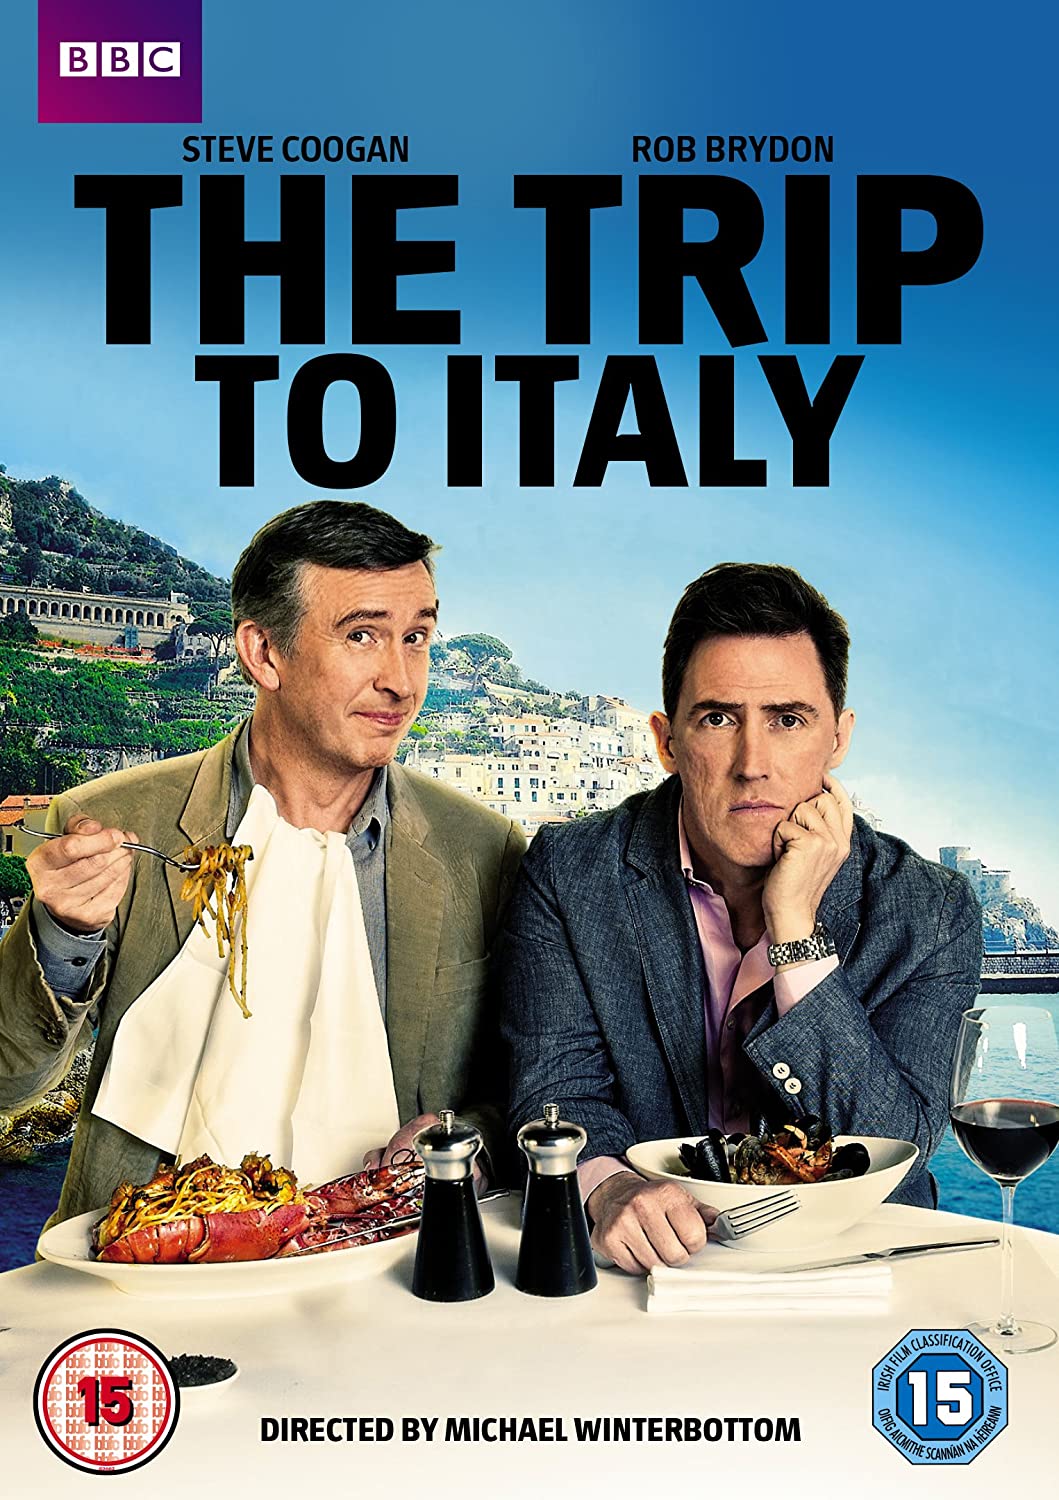 The Trip to Italy - 2014 Film